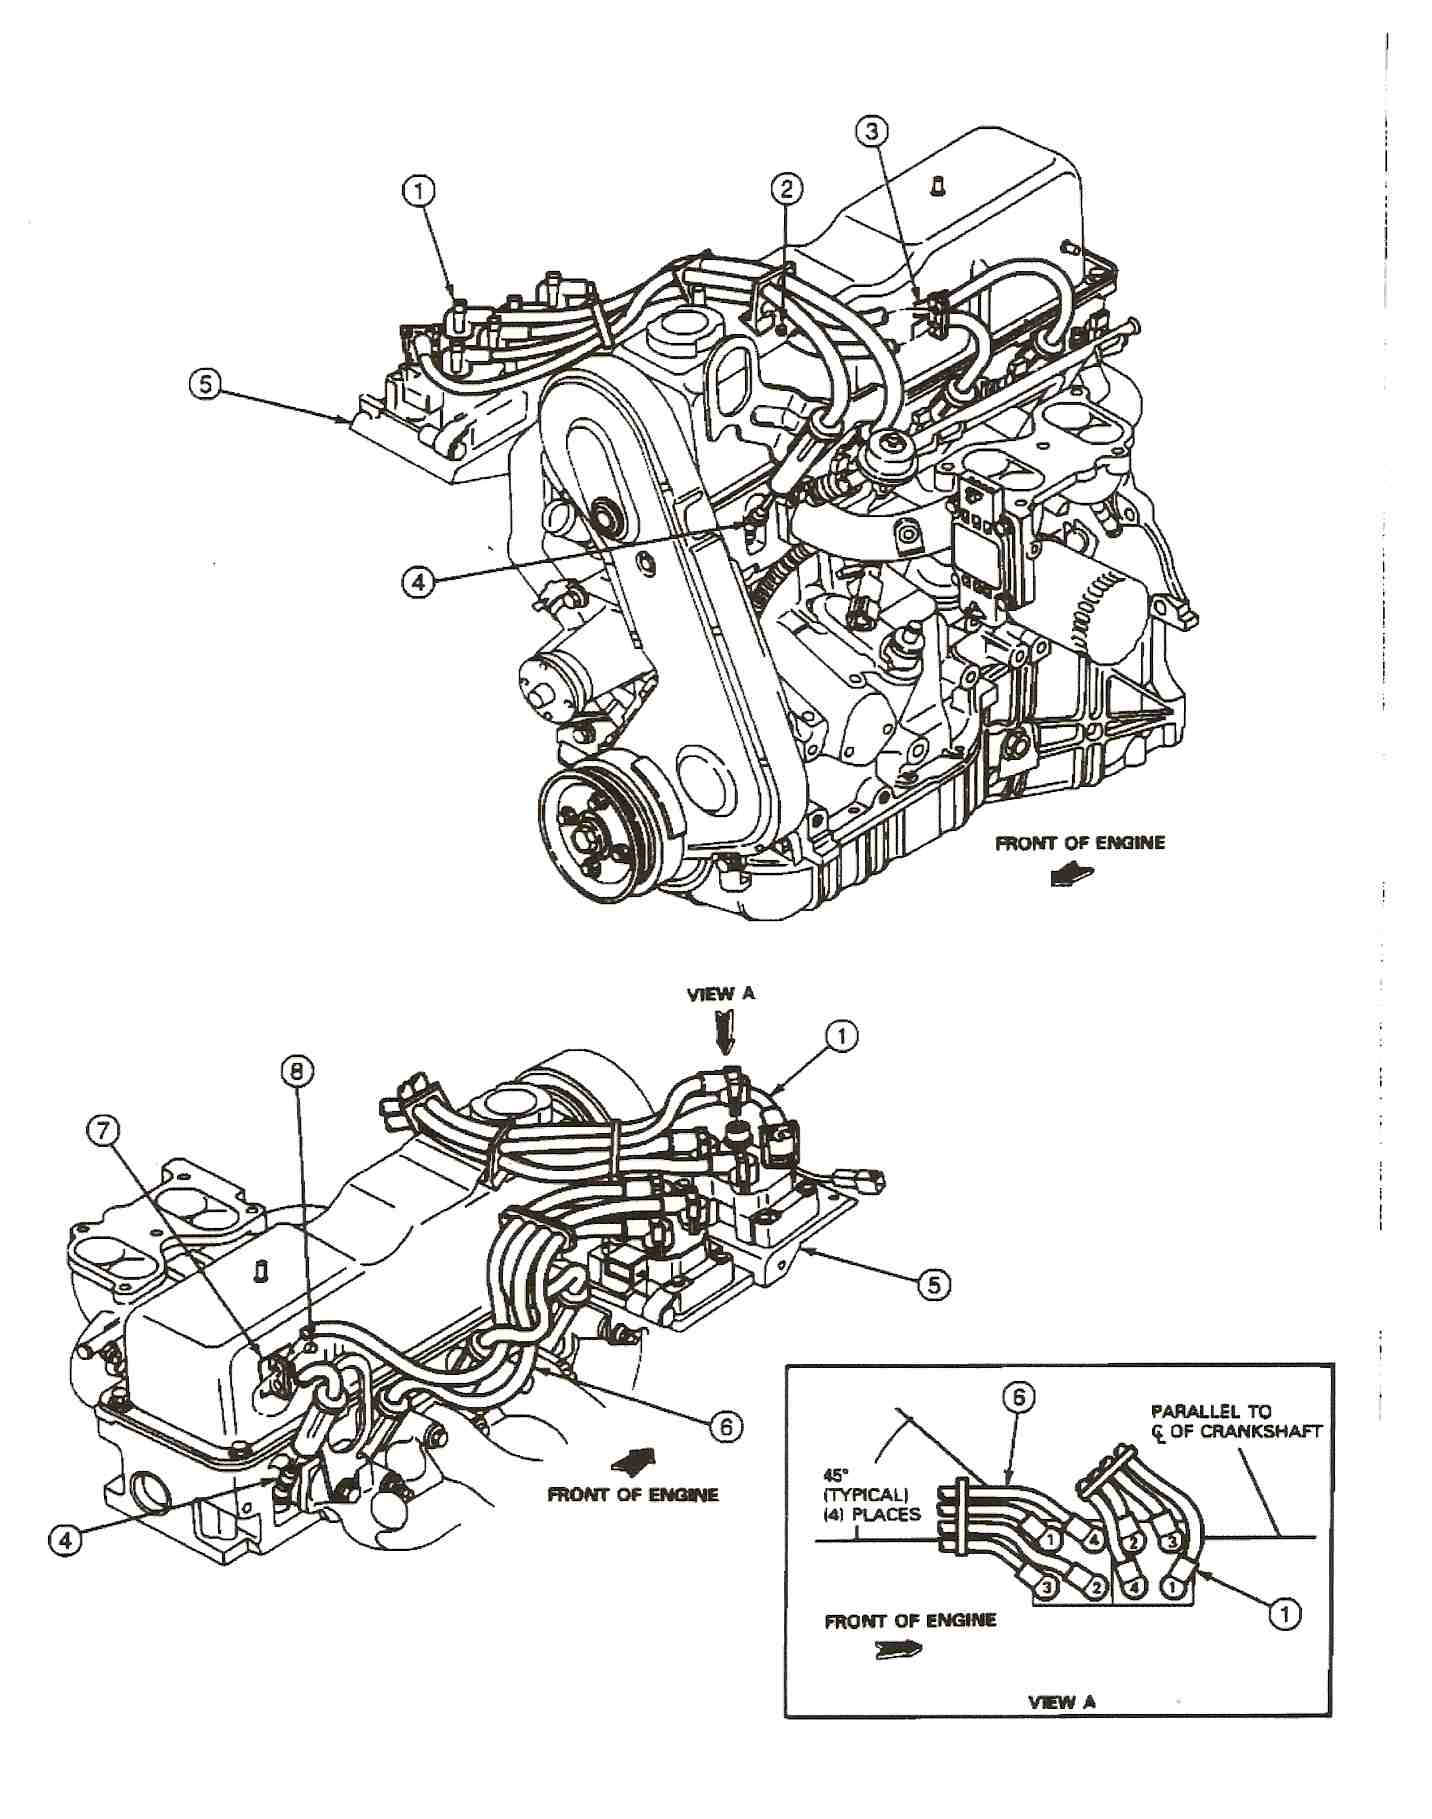 Do You Have A Diagram Of How To Reconnect The 8 Spark Plug